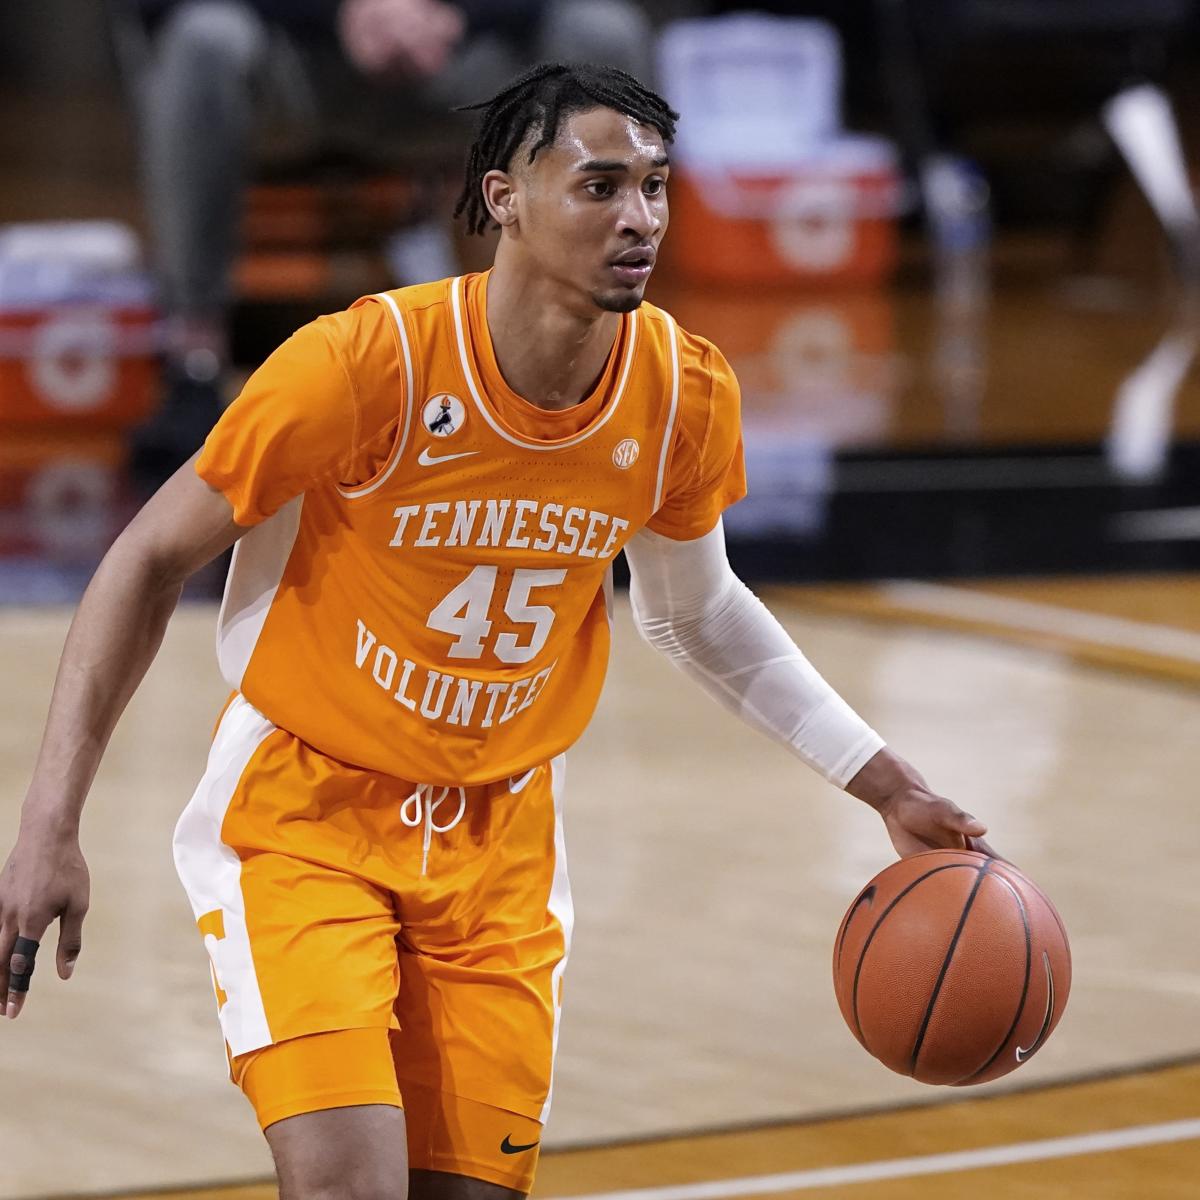 NBA Draft 2021 Latest 1stRound Projections and Top Prospects' Stock